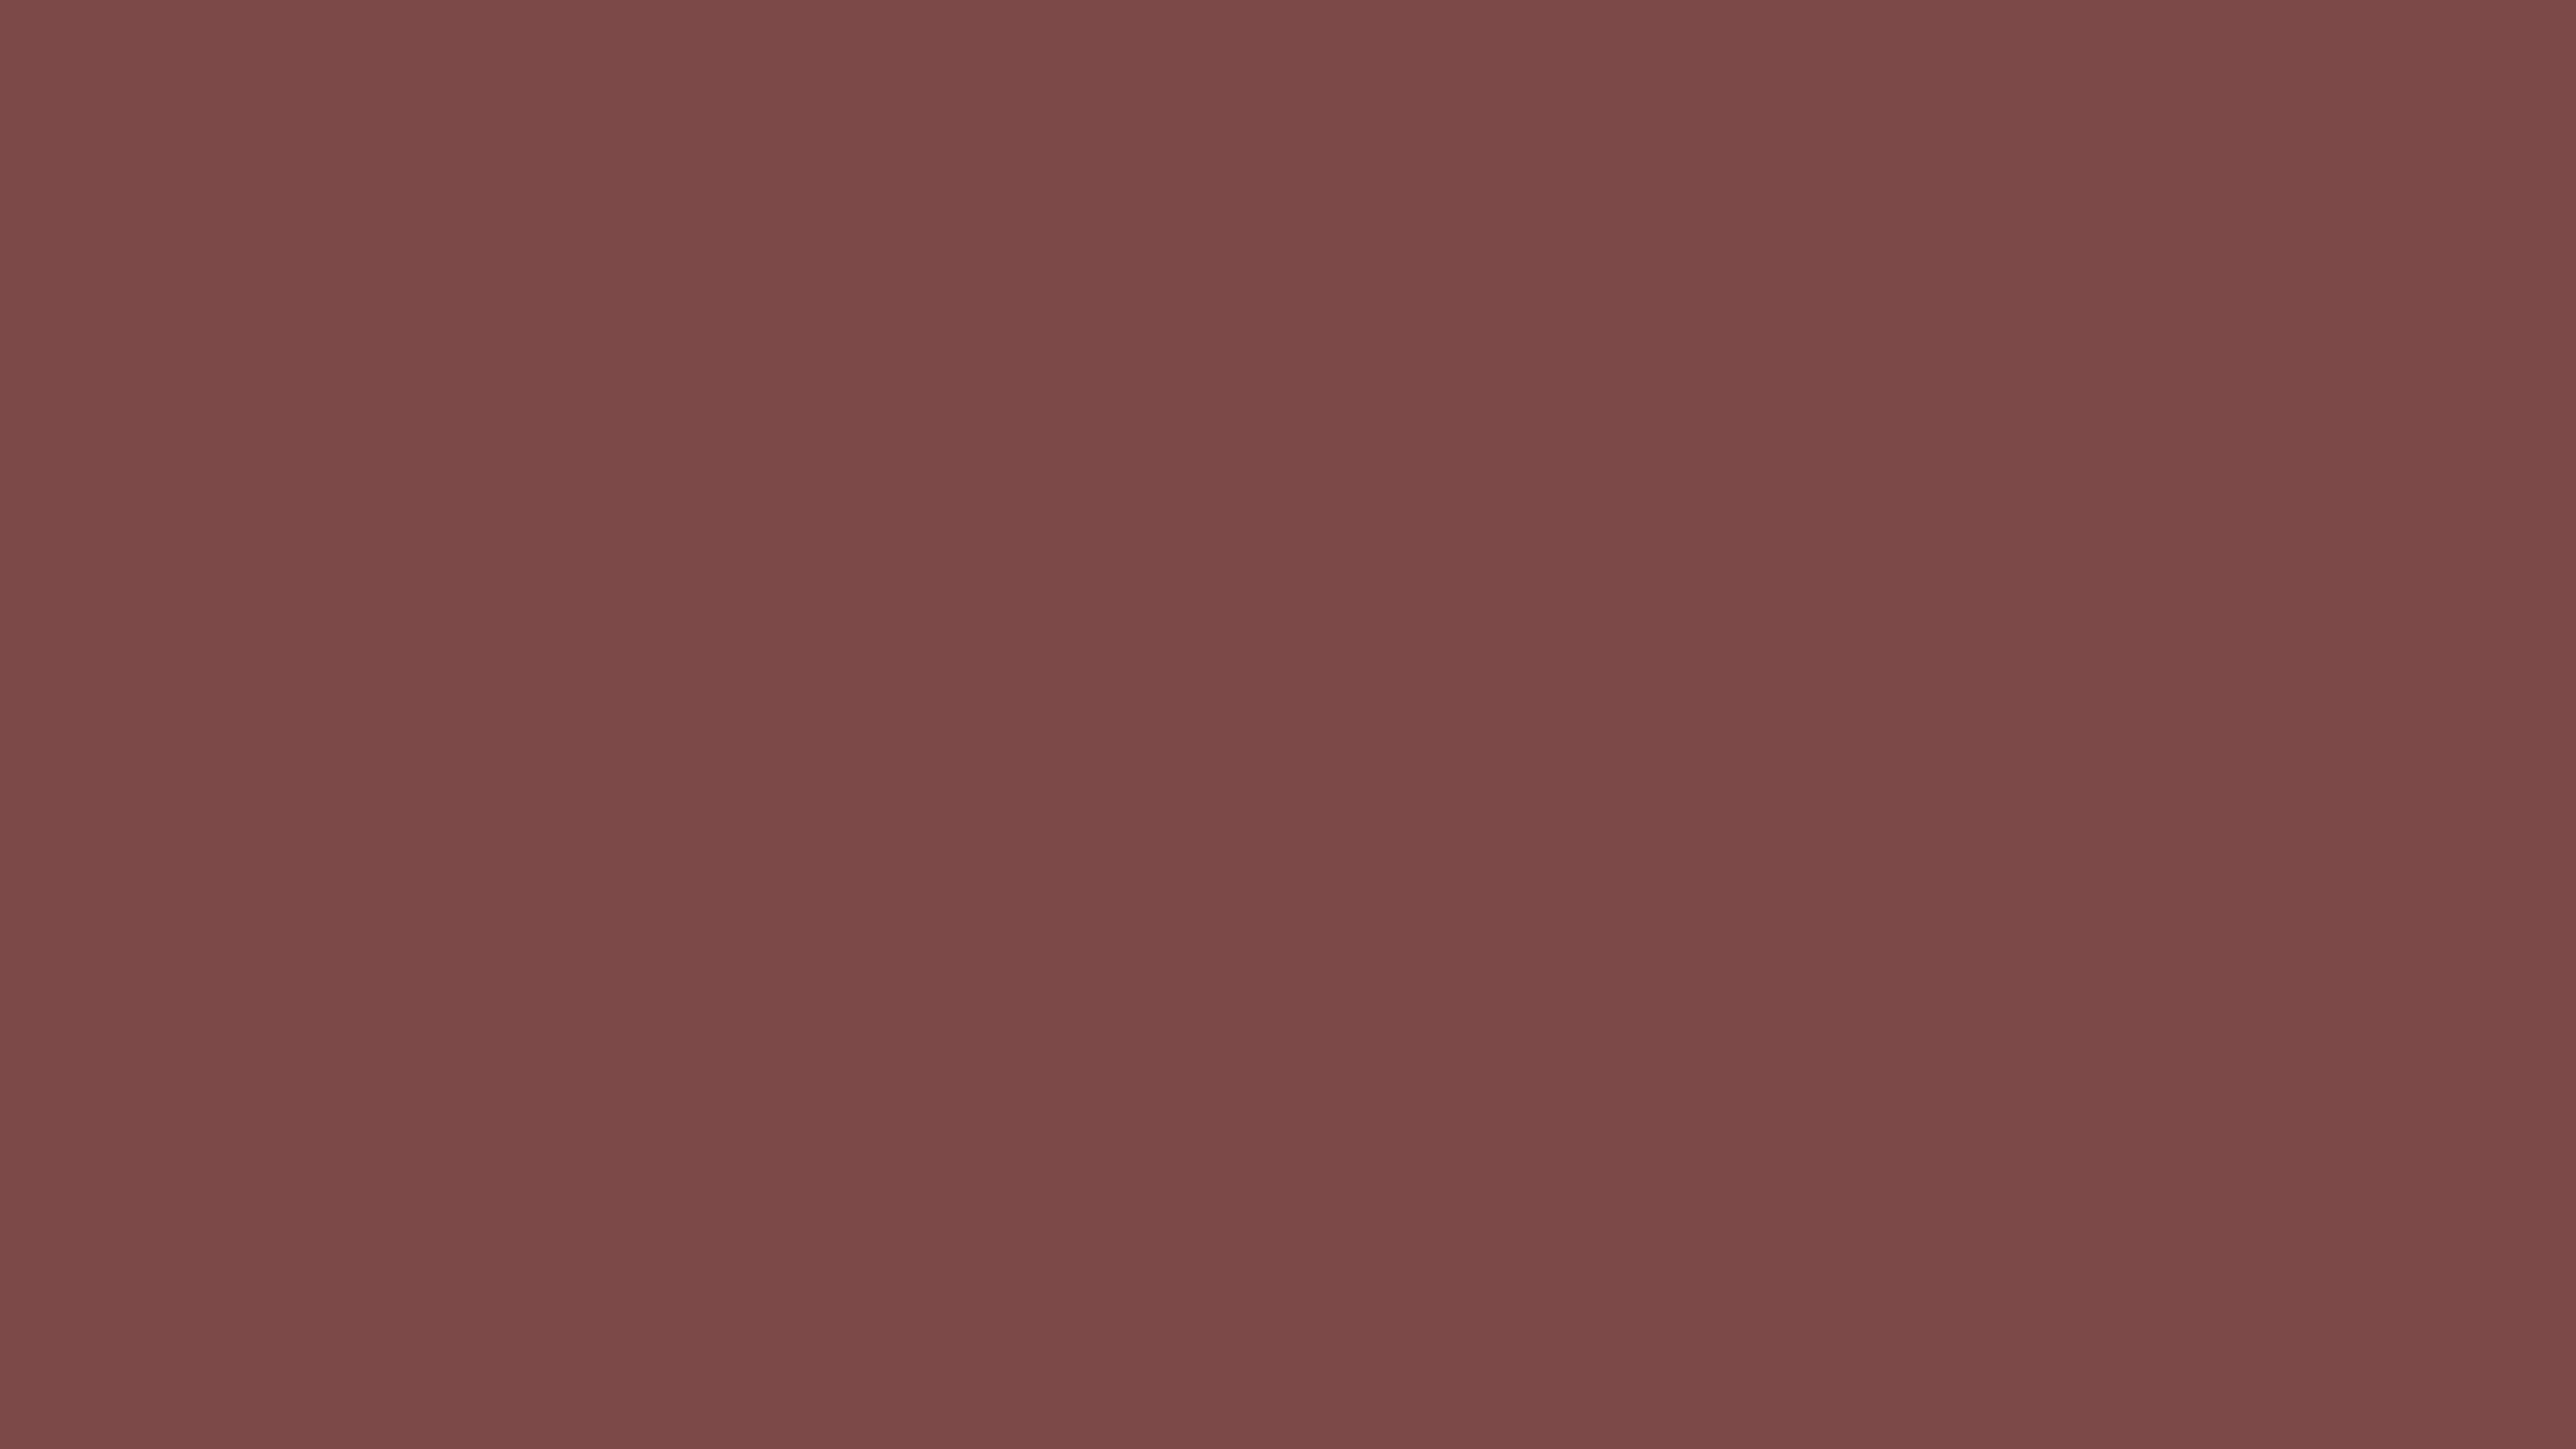 7680x4320 Tuscan Red Solid Color Background